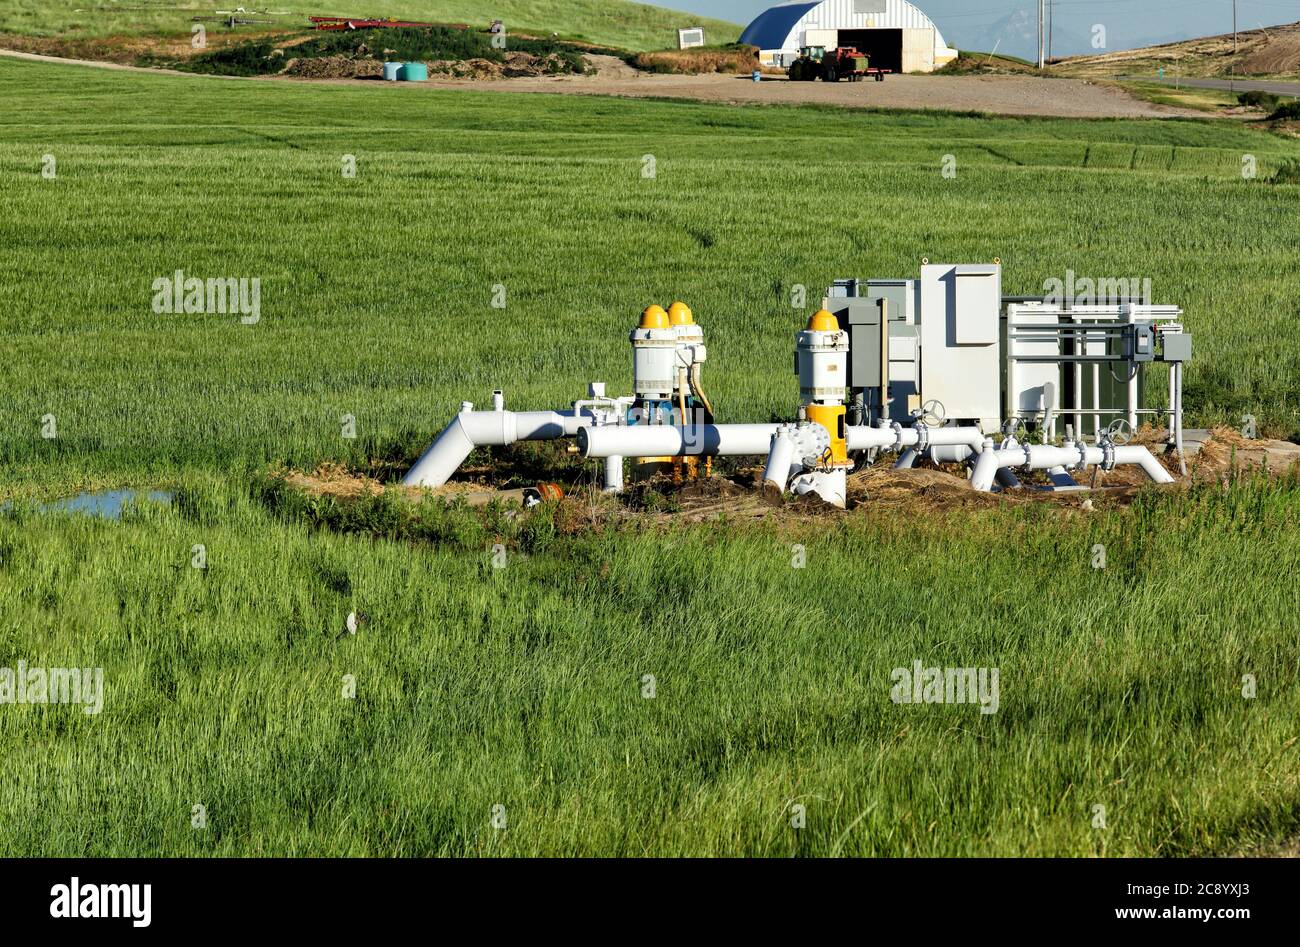 Three agricultural water pumps at a pumping station to bring water up from a well for irrigation in an Idaho Farm field. Stock Photo